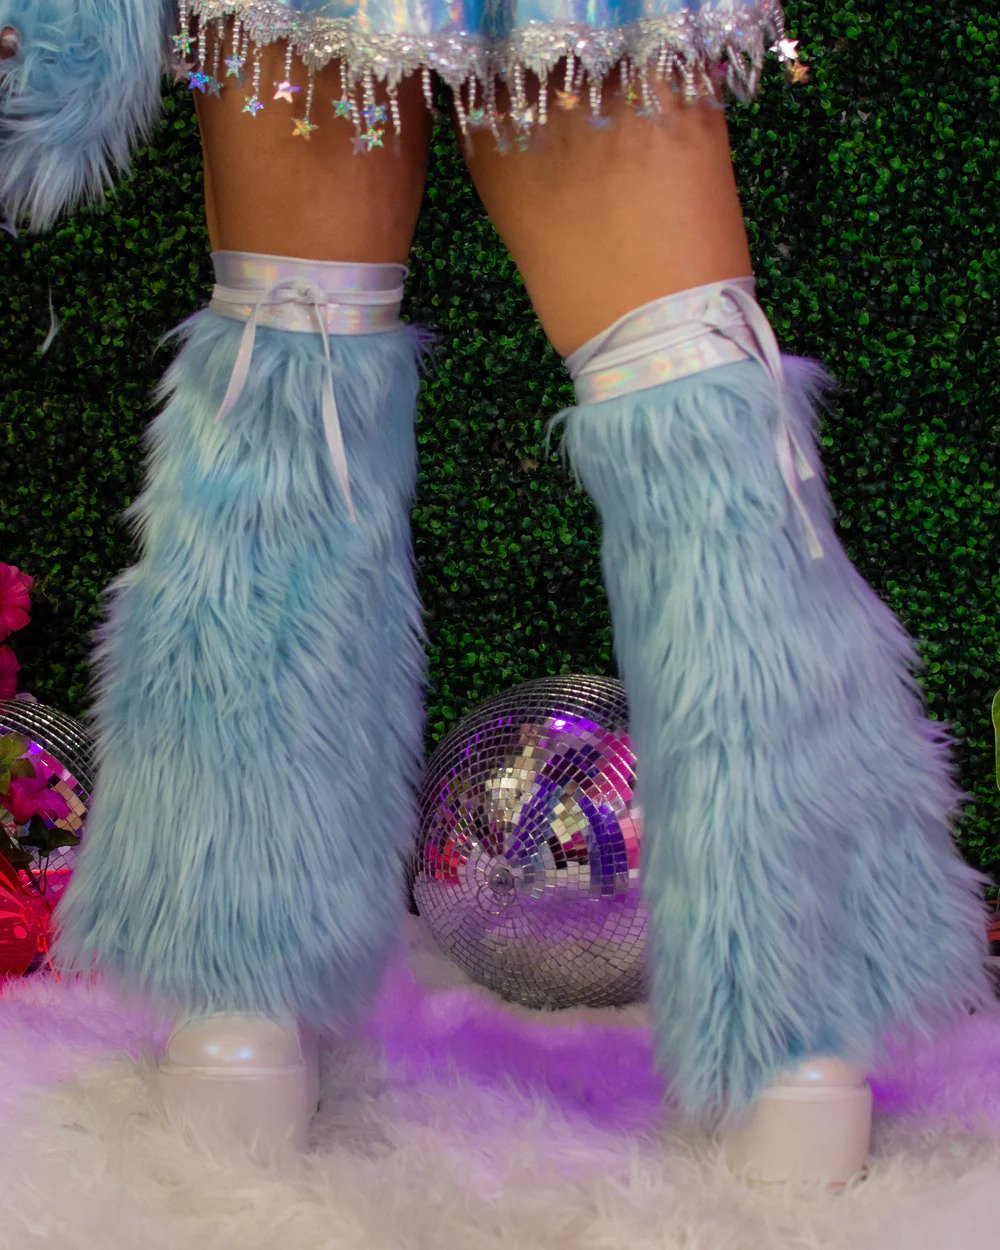 Rolita Couture x RW Baby Blue Fluffies